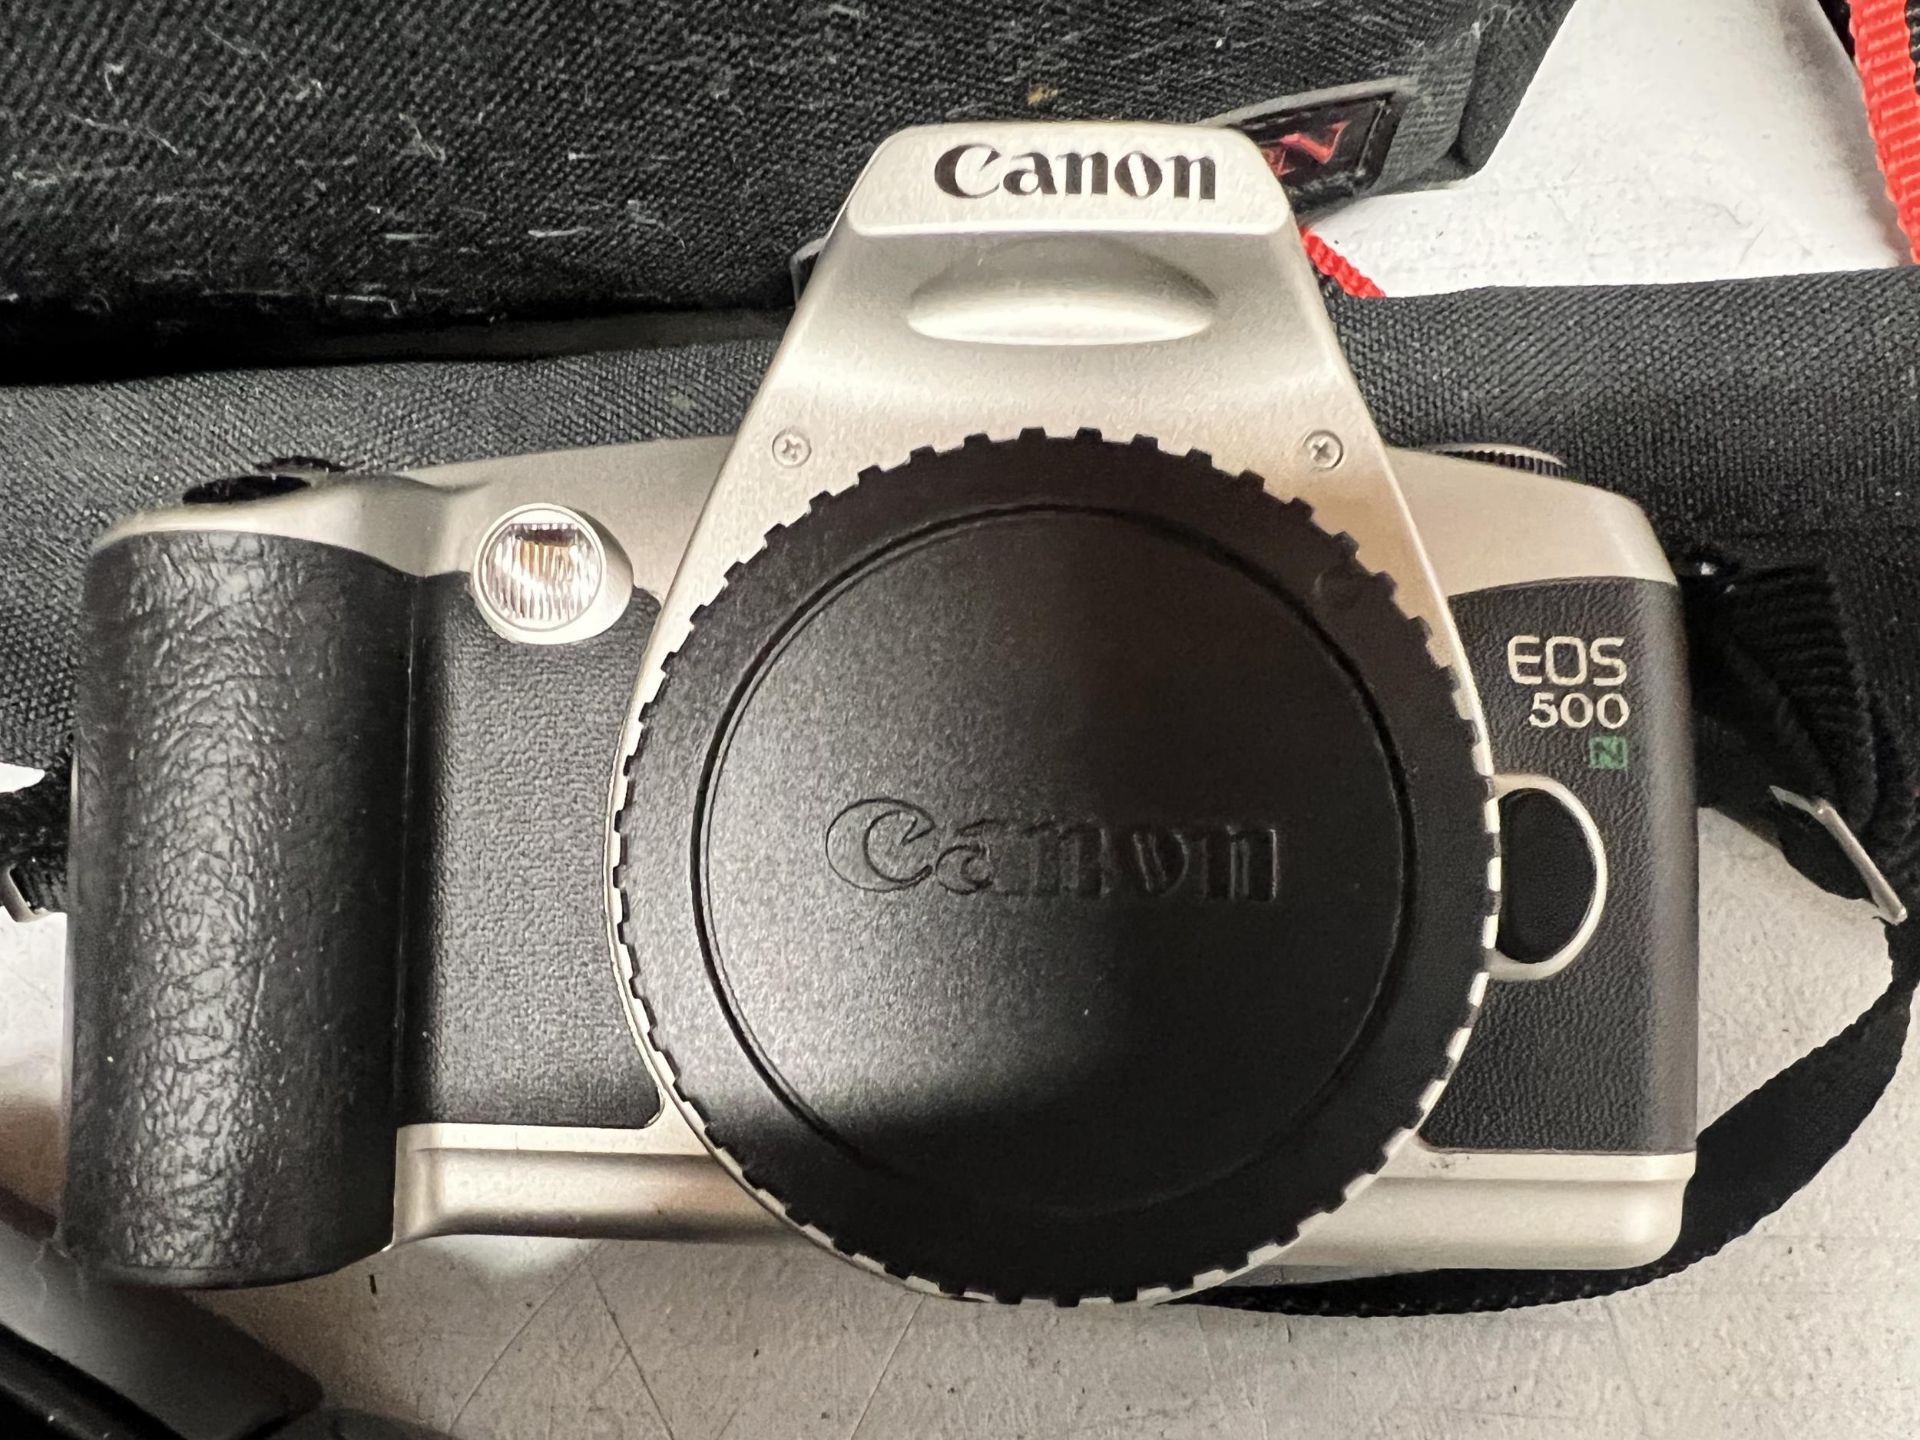 A CANON EOS 500 CAMERA WITH TWO EXTRA LENSES, TWO FLASHES AND A CAMERA BAG - Image 4 of 6